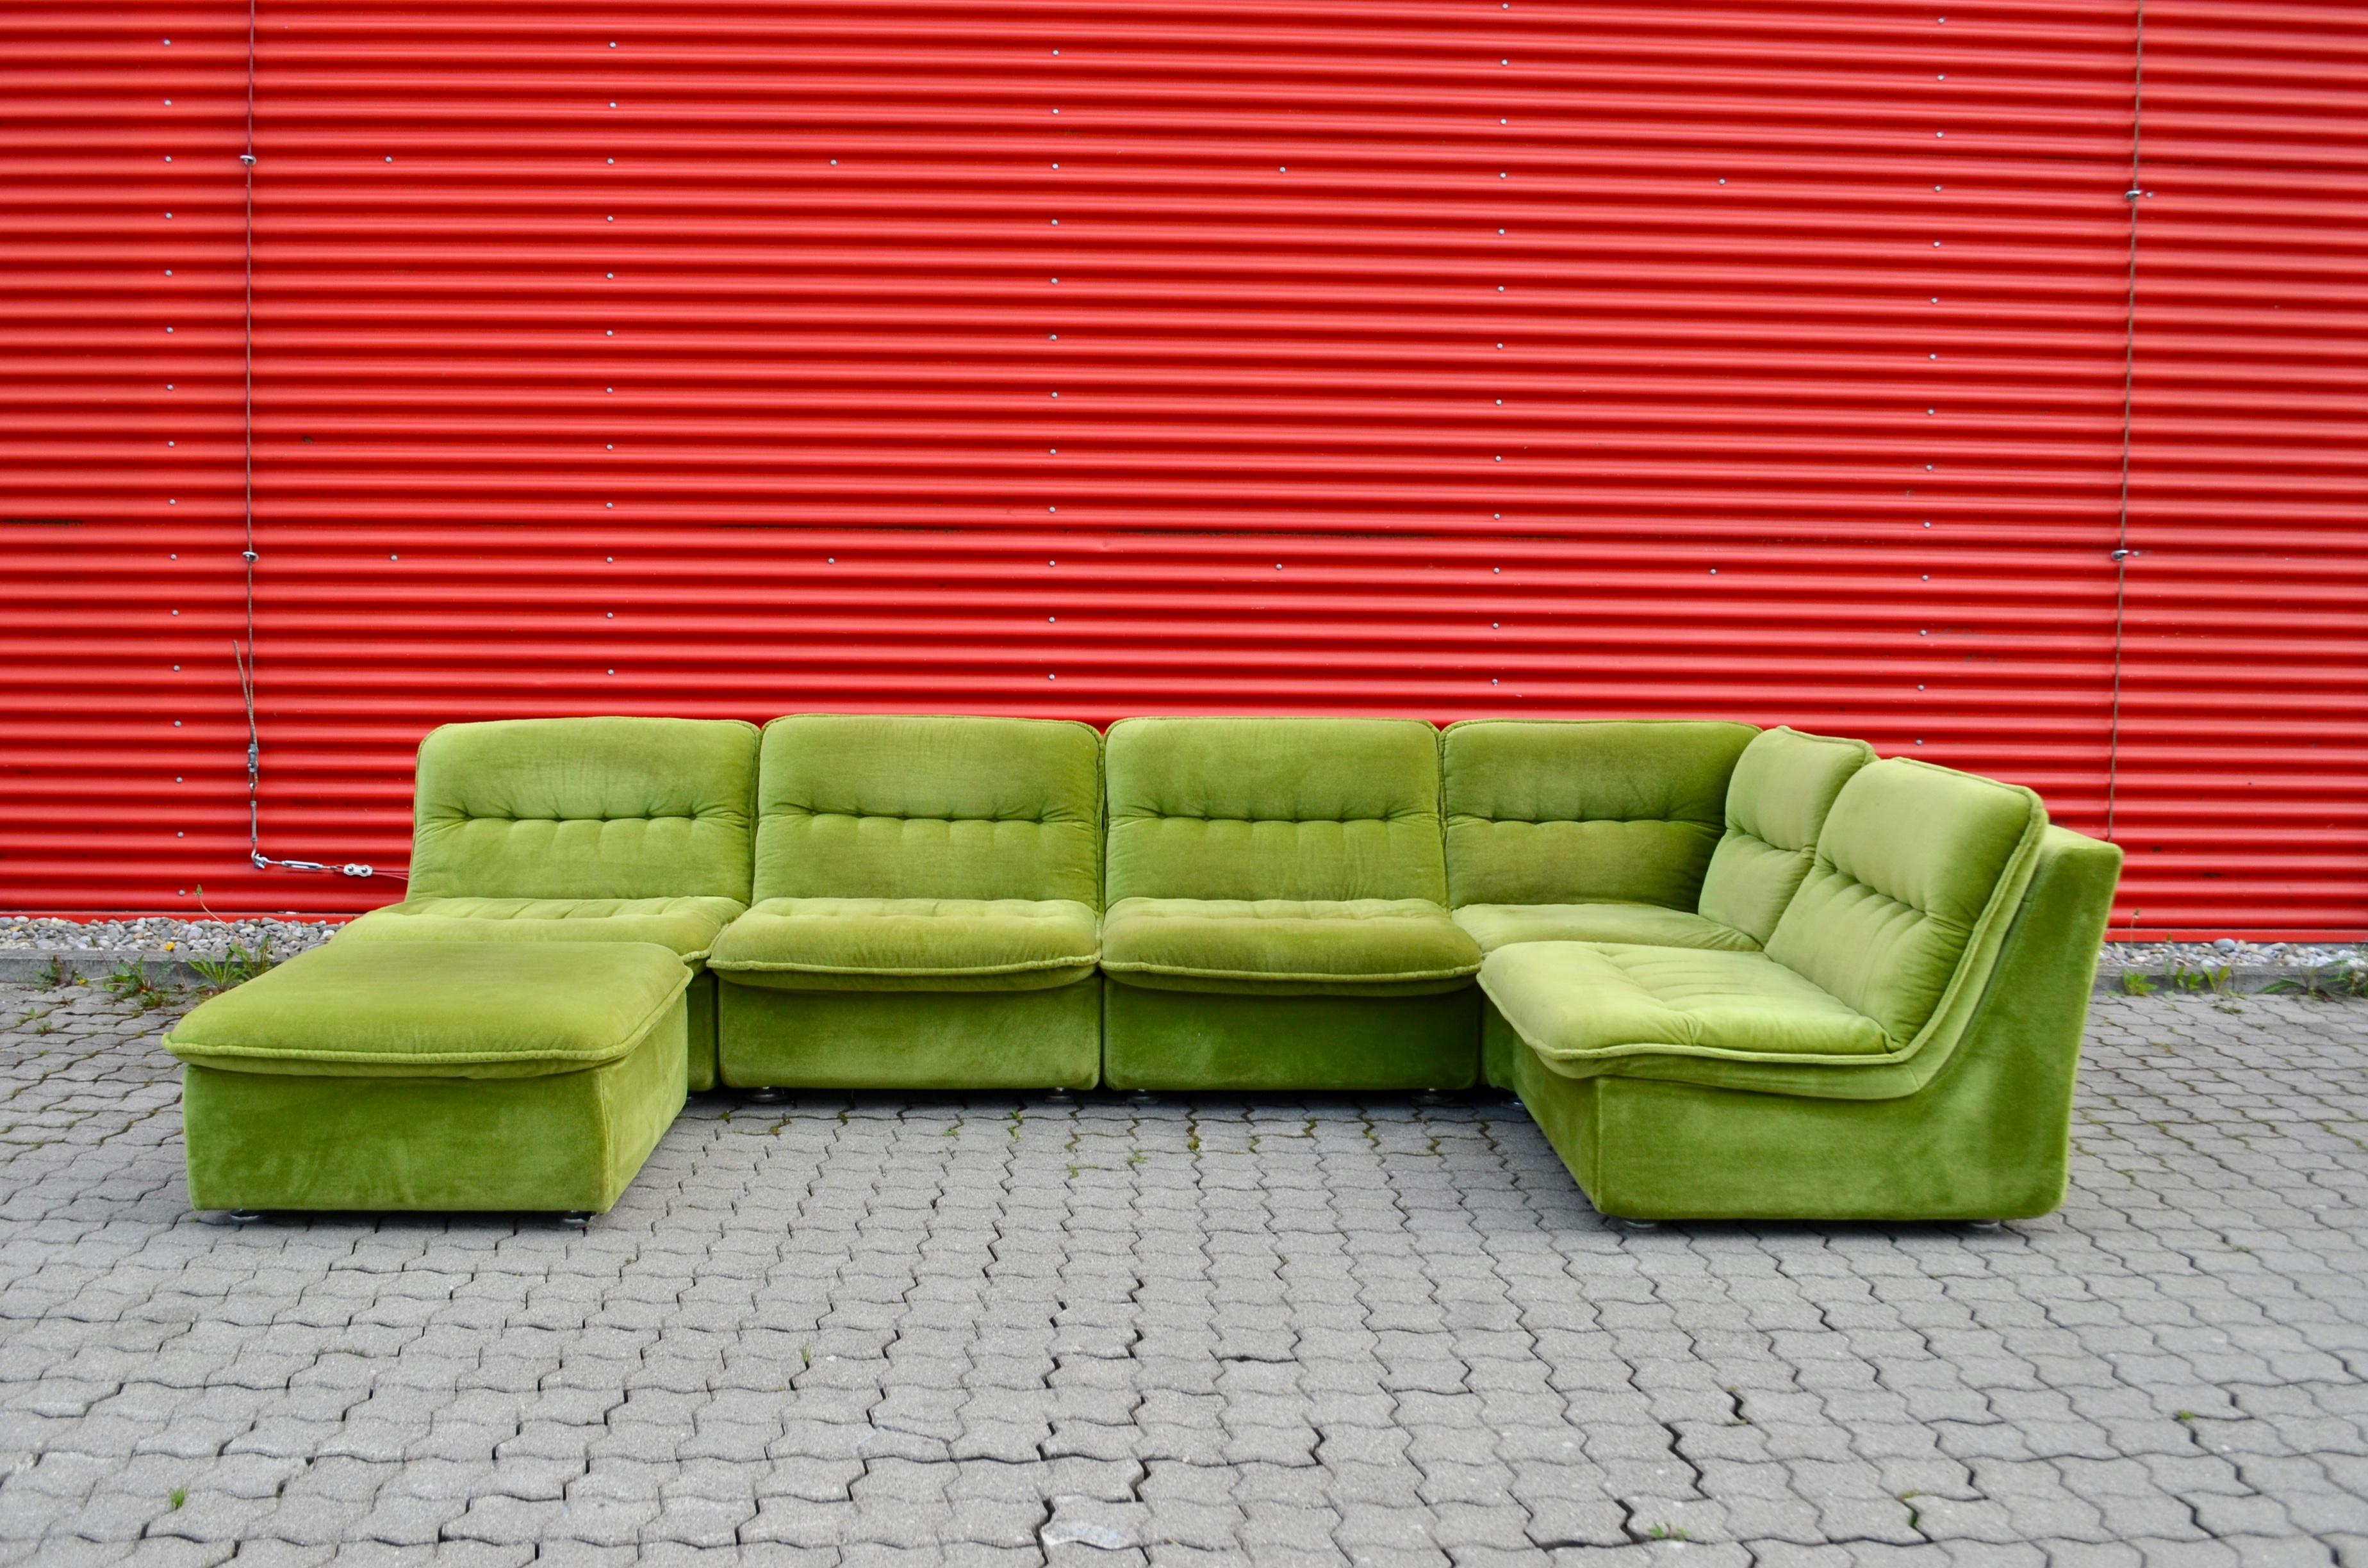 Beautiful vintage limegreen 1970s modular sofa from Germany.
The fabric is a soft verlours in good condition.
It consists 6 elements.
4 Seating elements
1 corner element
1 pouf
also 2 armrest and 5 clings for connecting the sofa